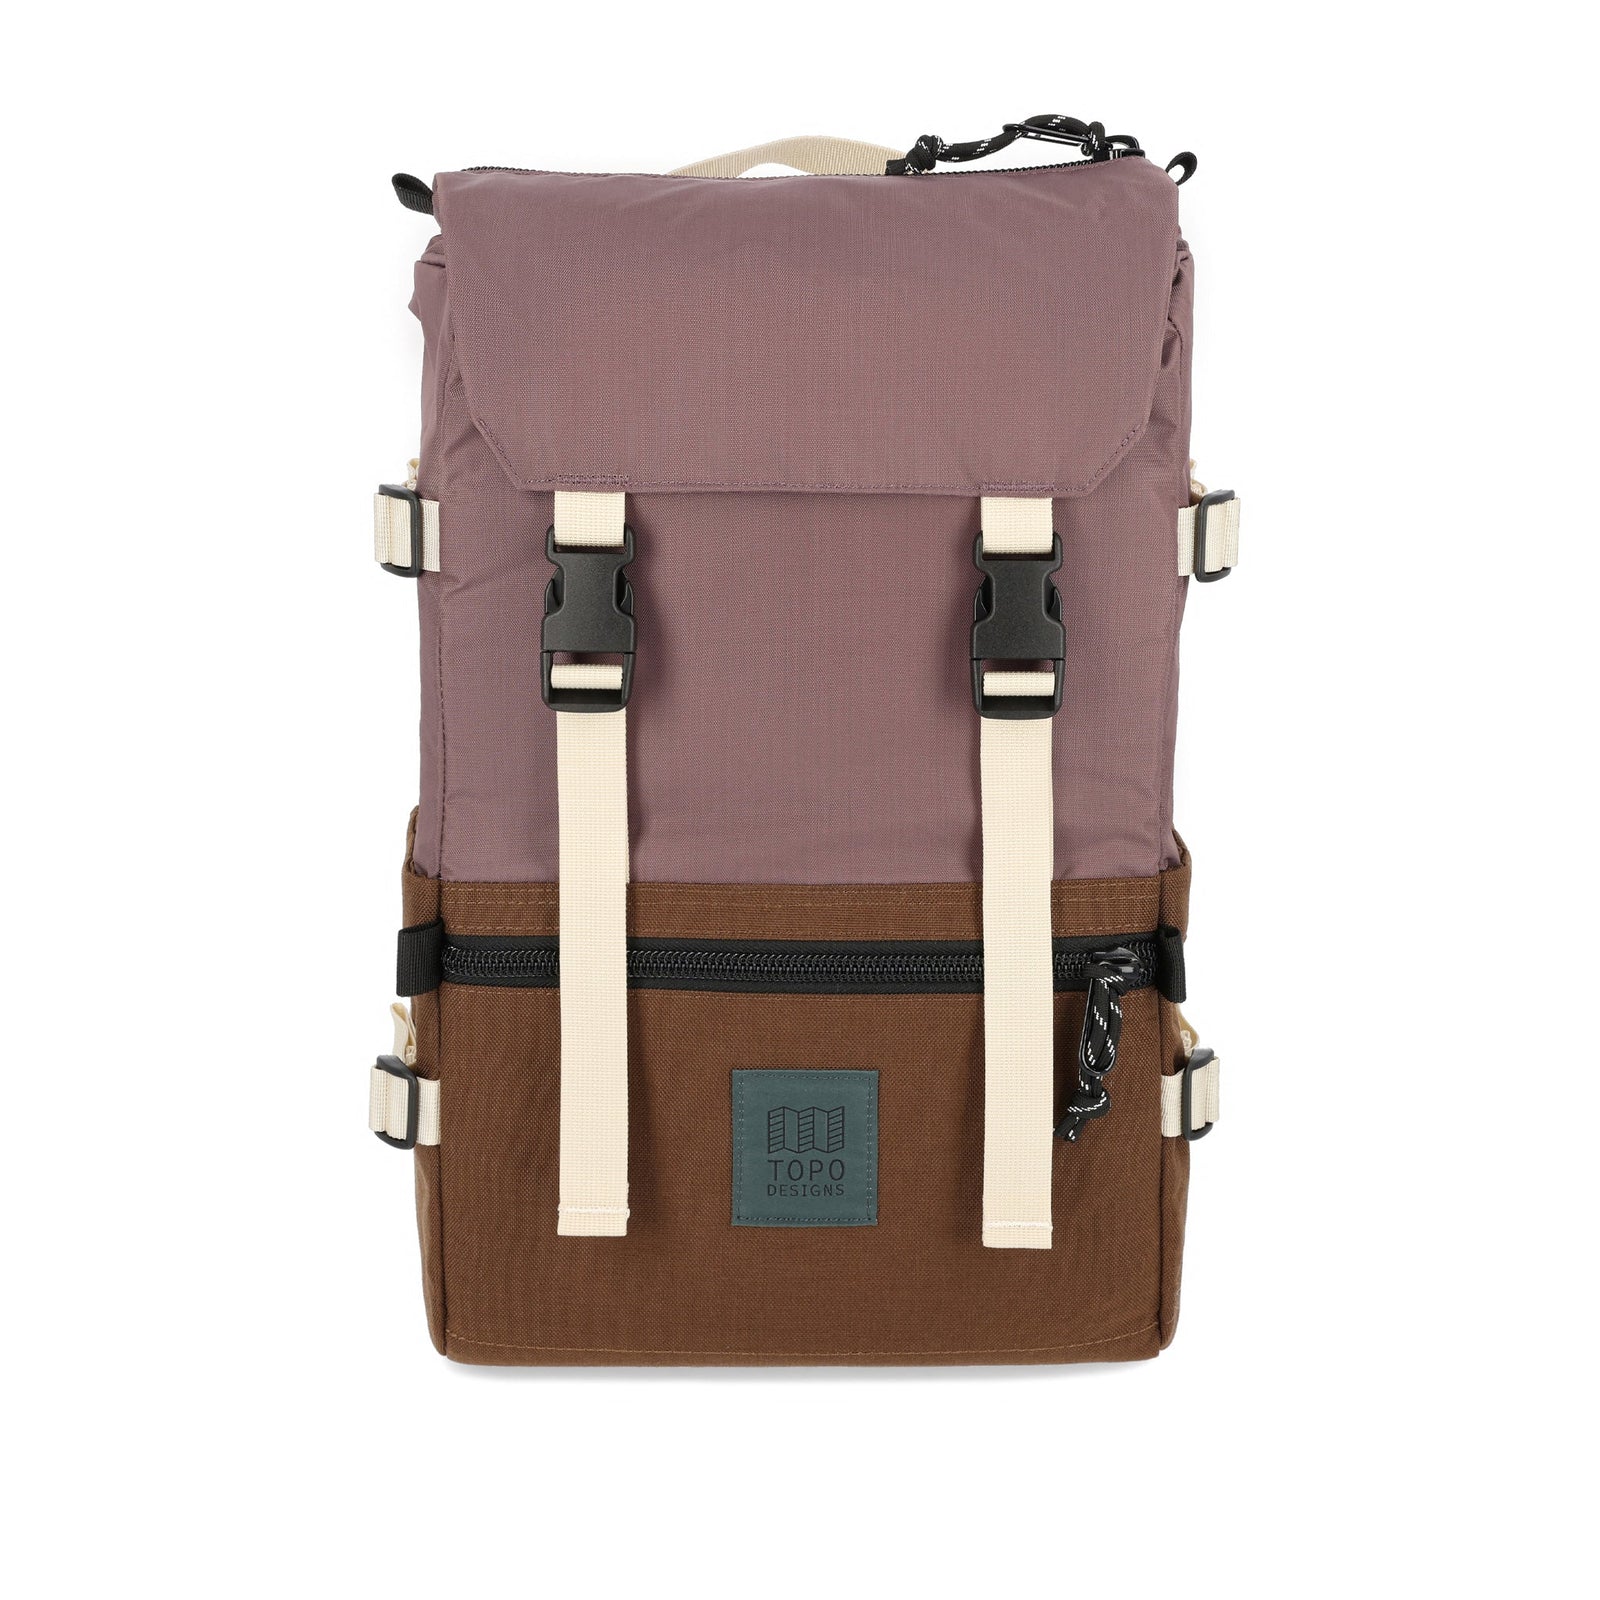 Topo Designs Rover Pack Classic laptop backpack in recycled "Peppercorn / Cocoa" purple brown.